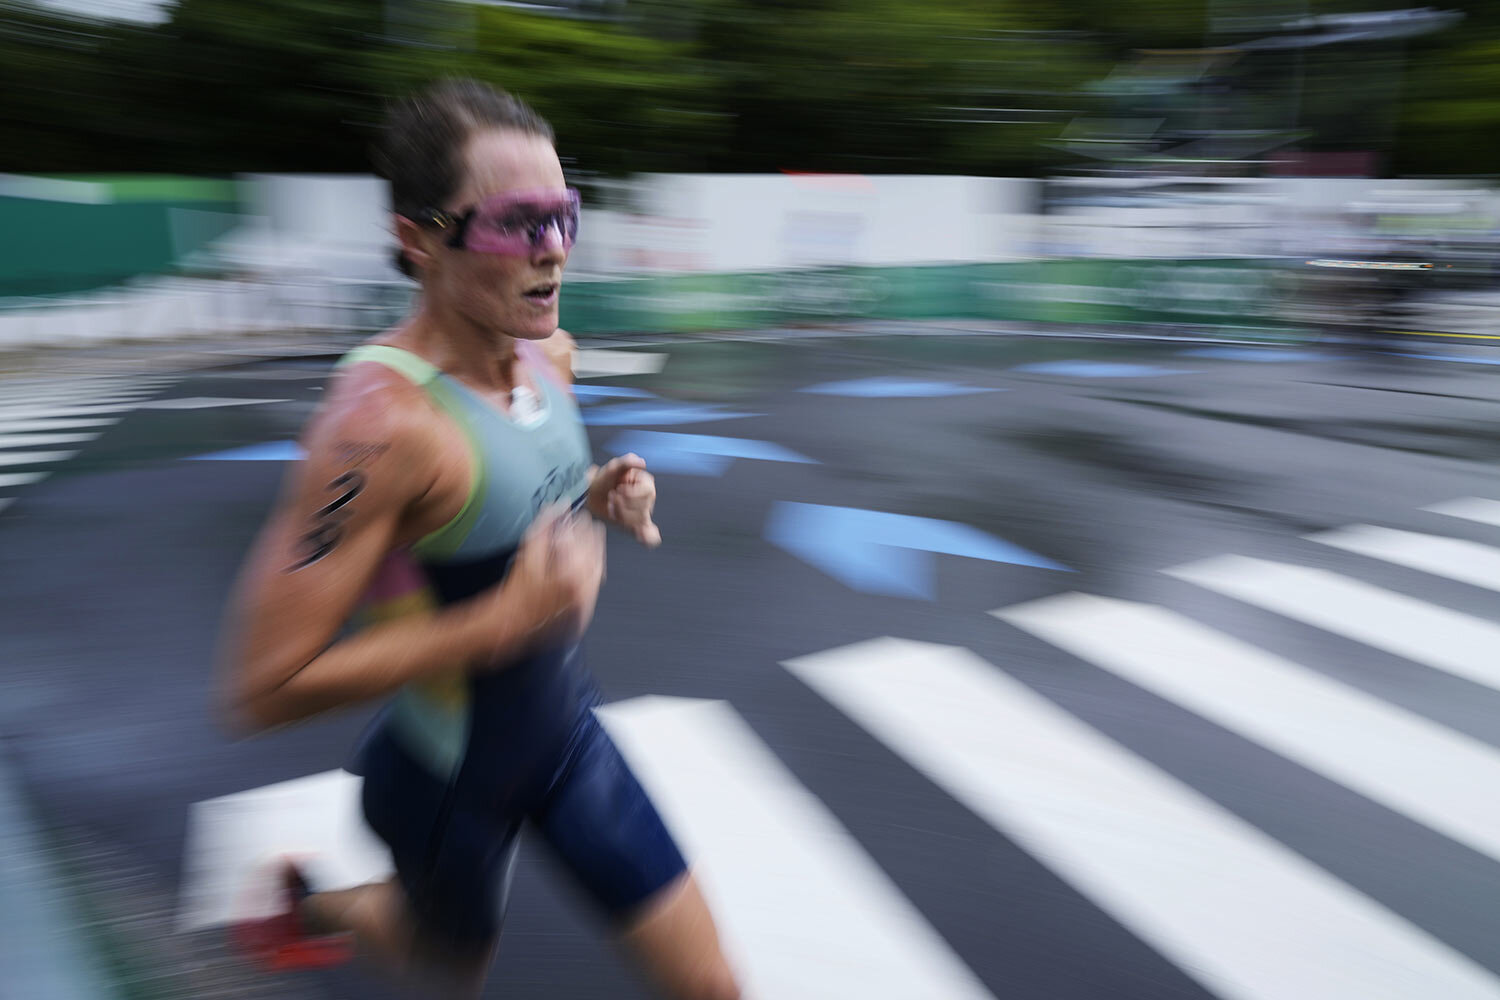  Flora Duffy, of Bermuda, runs during the women's triathlon competition at the 2020 Summer Olympics Tuesday, July 27, 2021, in Tokyo, Japan. (AP Photo/Eugene Hoshiko) 